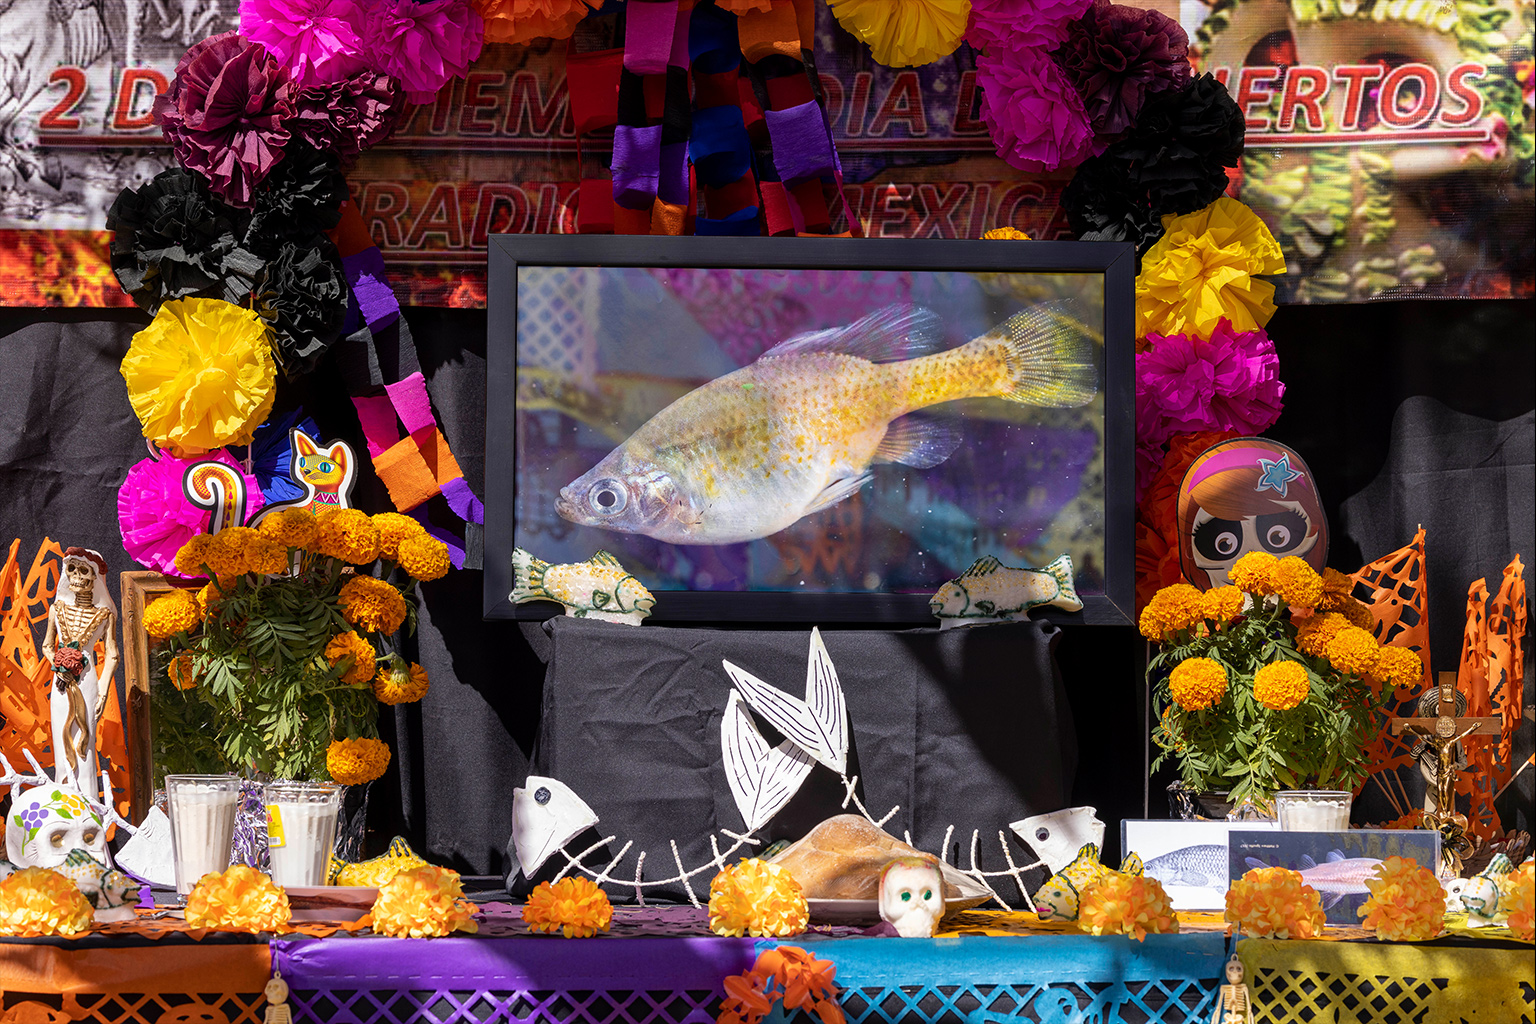 The golden skiffia themed Day of the Dead altar.